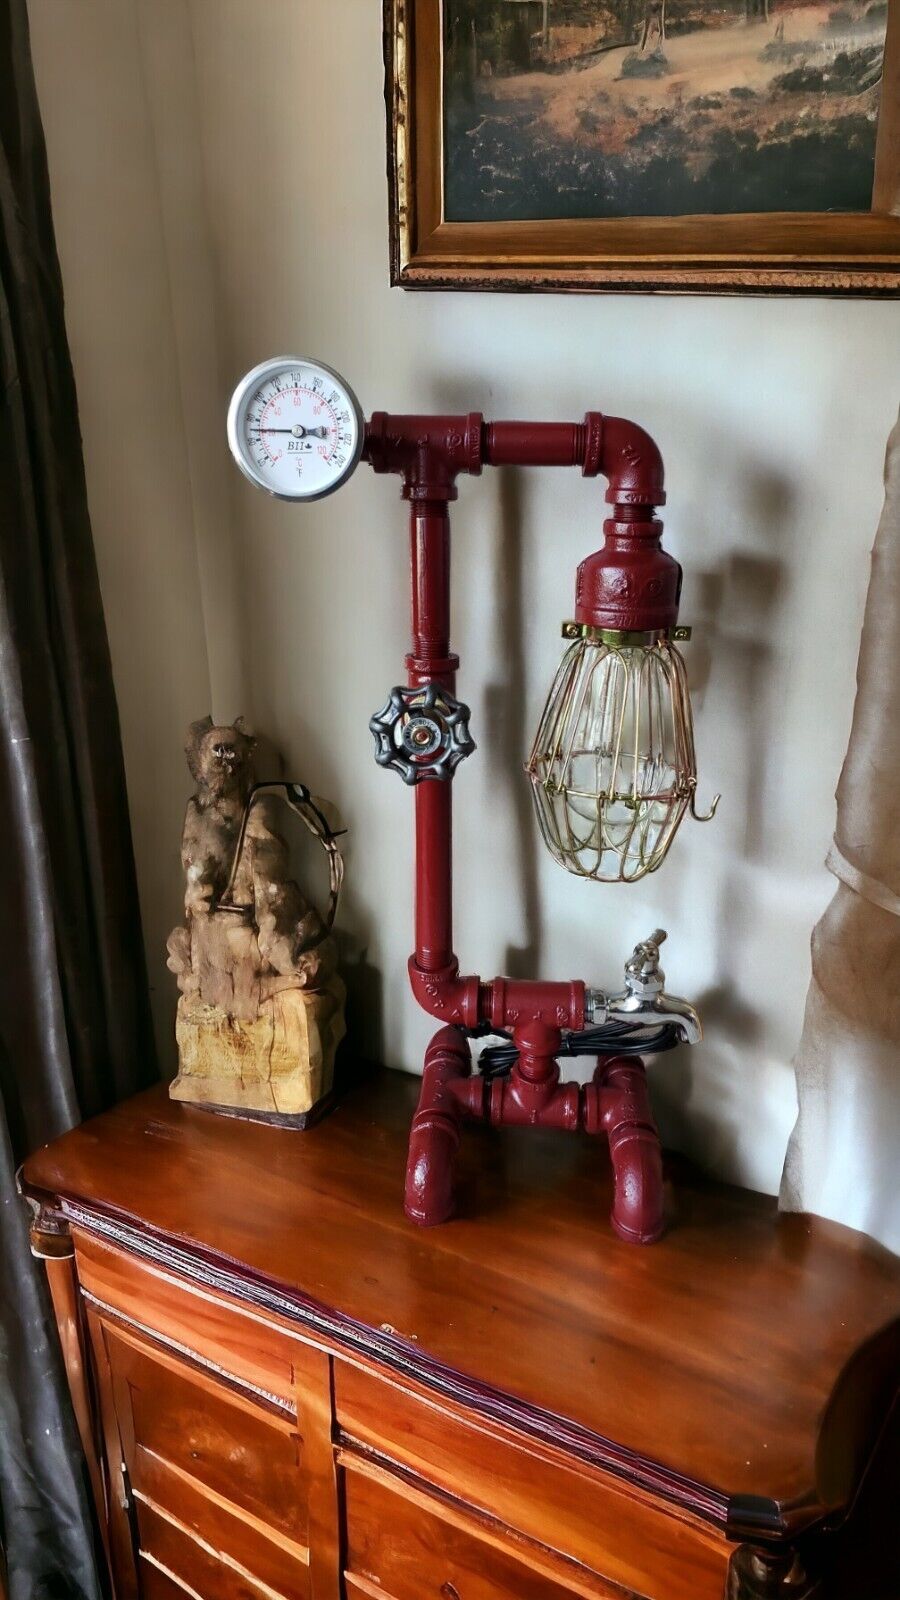 Handcrafted Industrial Pipe Retro steampunk style table lamp w/valve switch